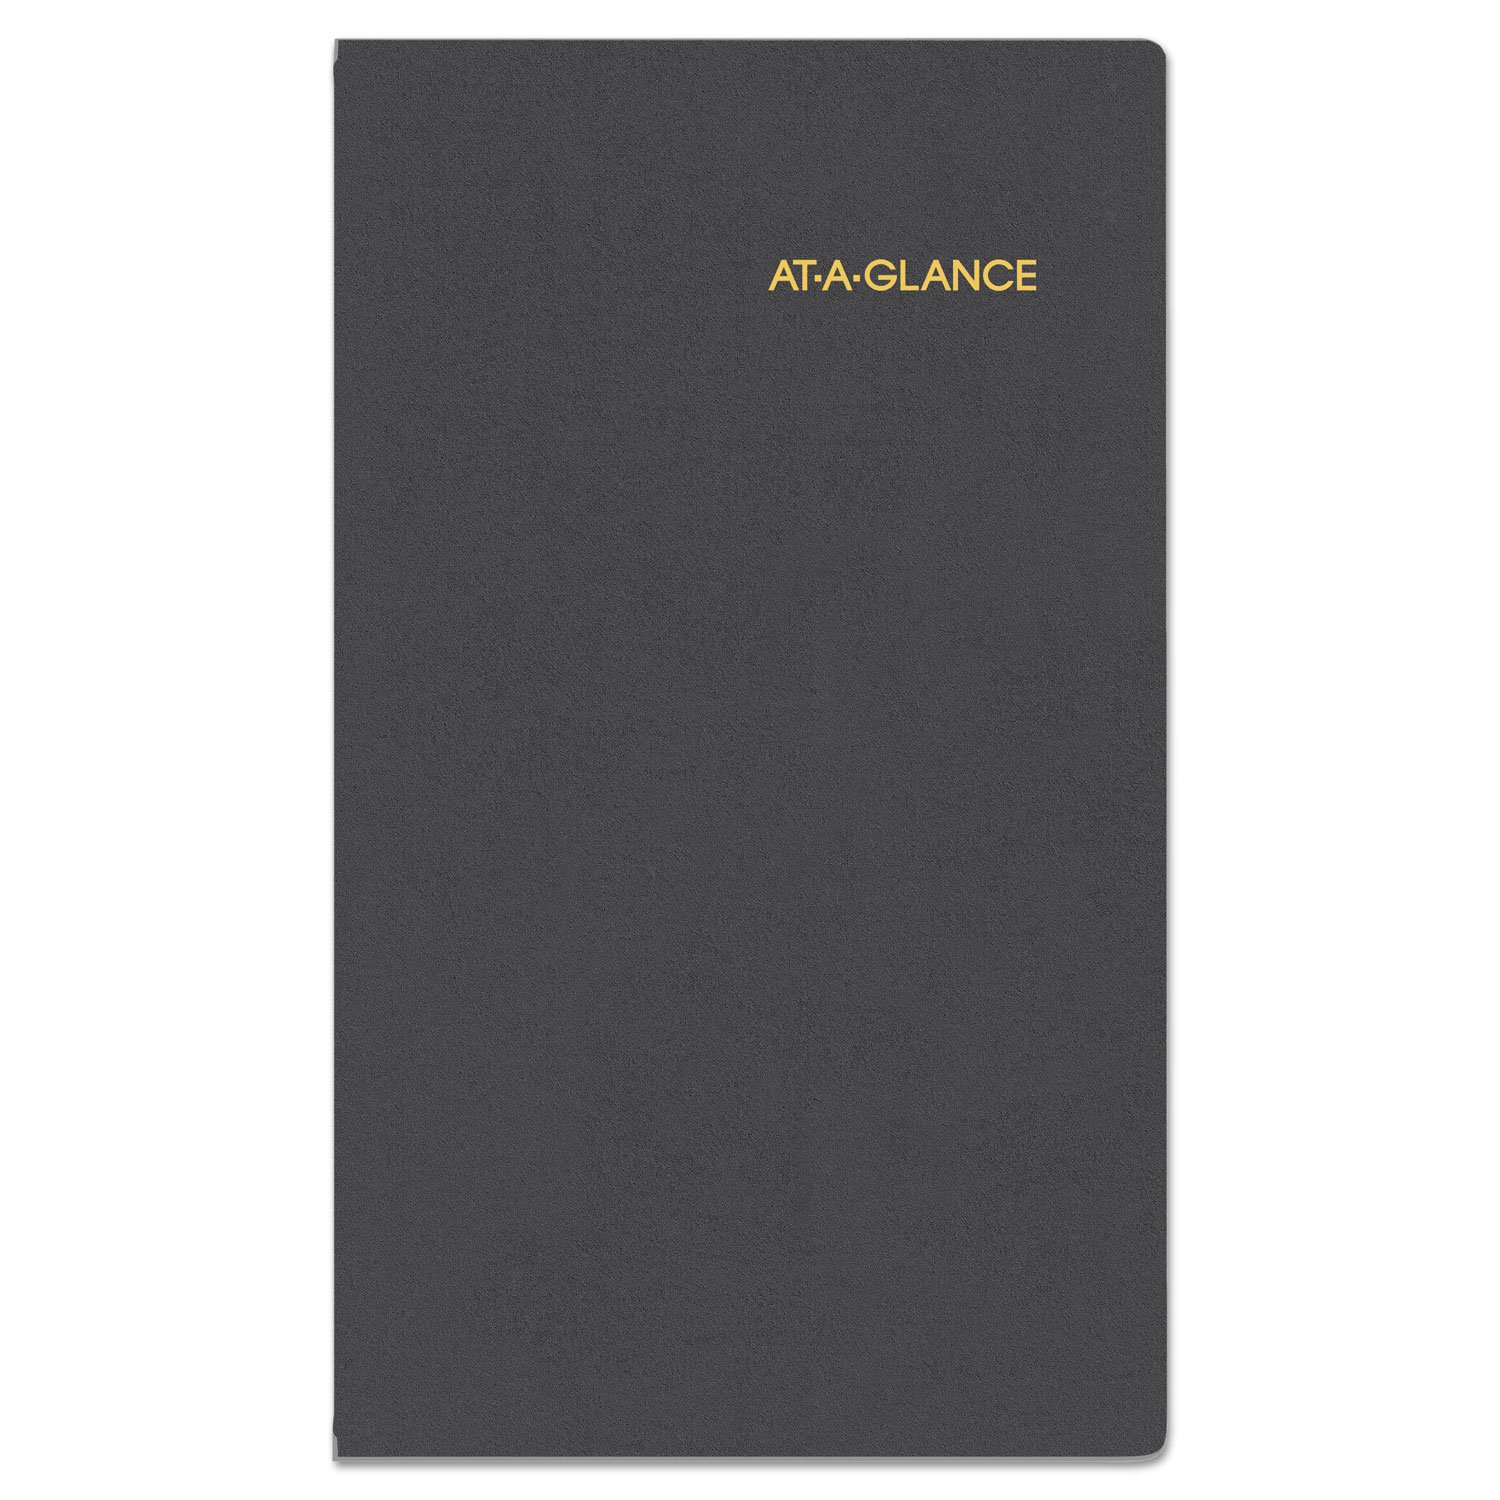 Compact Weekly Appointment Book, 3 1/4 x 6 1/4, Black, 2018